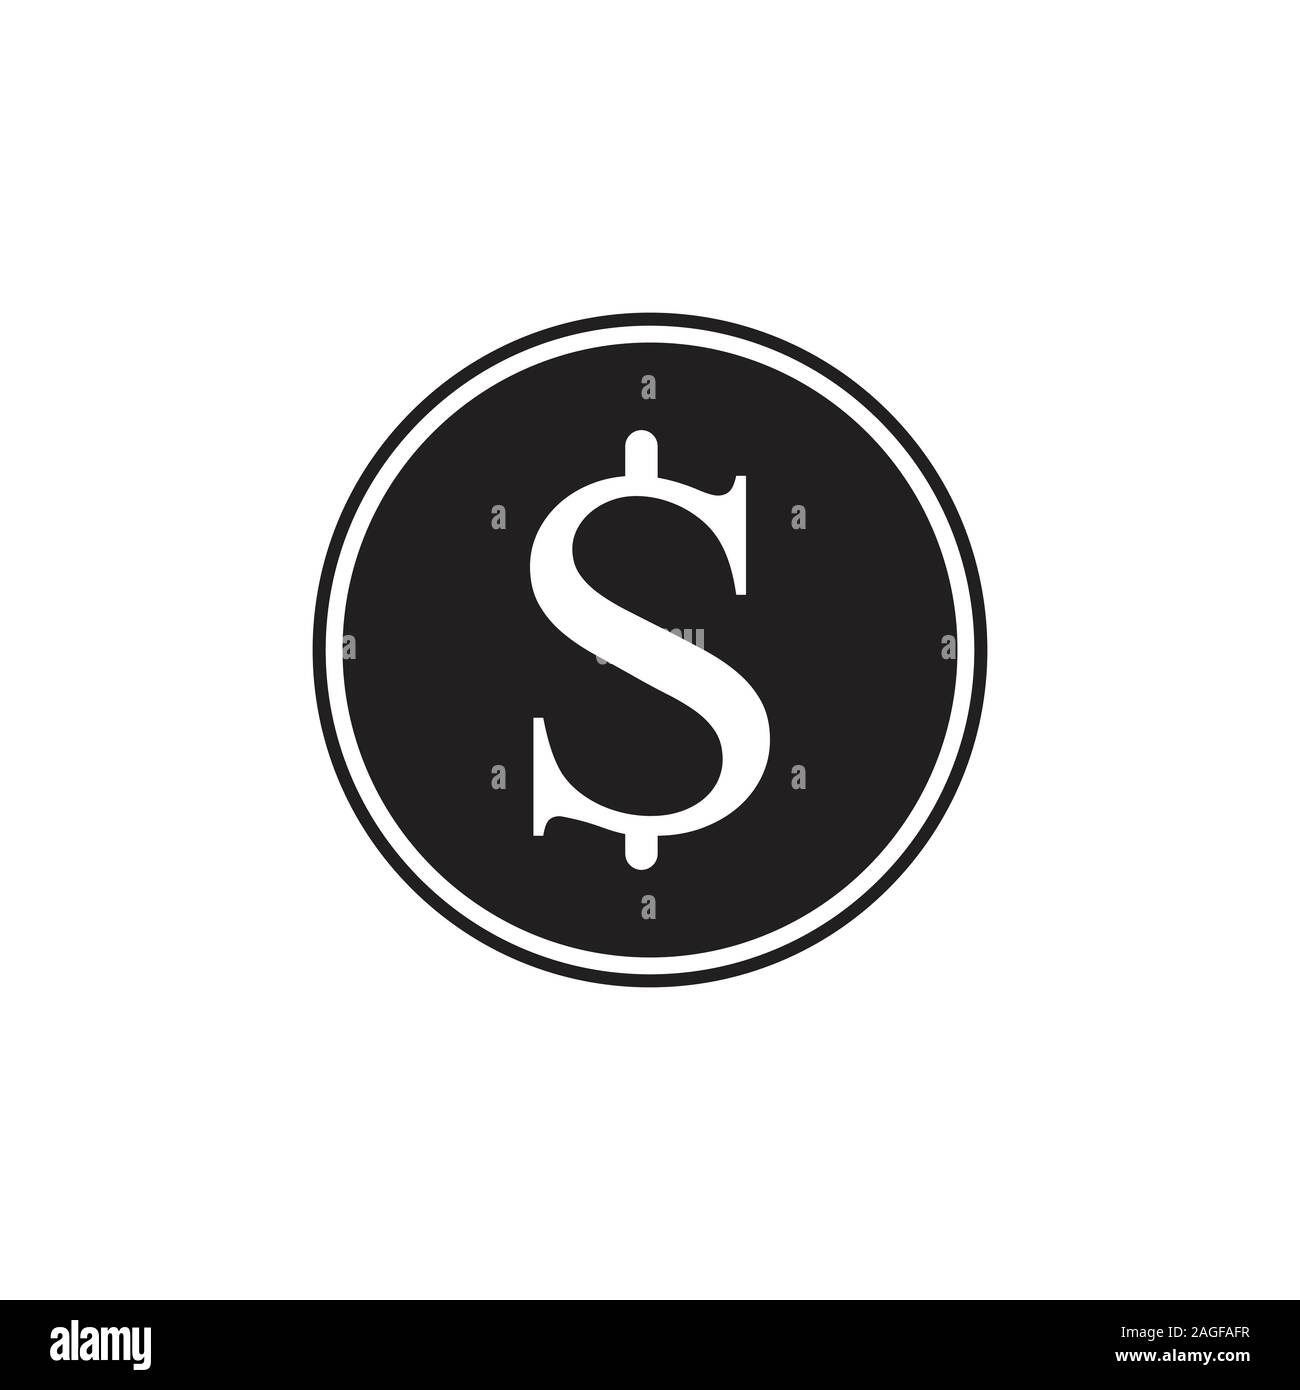 Money Icon Black Dollar Cash Isolated On Background Modern Simple Flat Sign Flat Dolar Symboll For Web Site Design Mobile App Business Internet Stock Vector Image Art Alamy